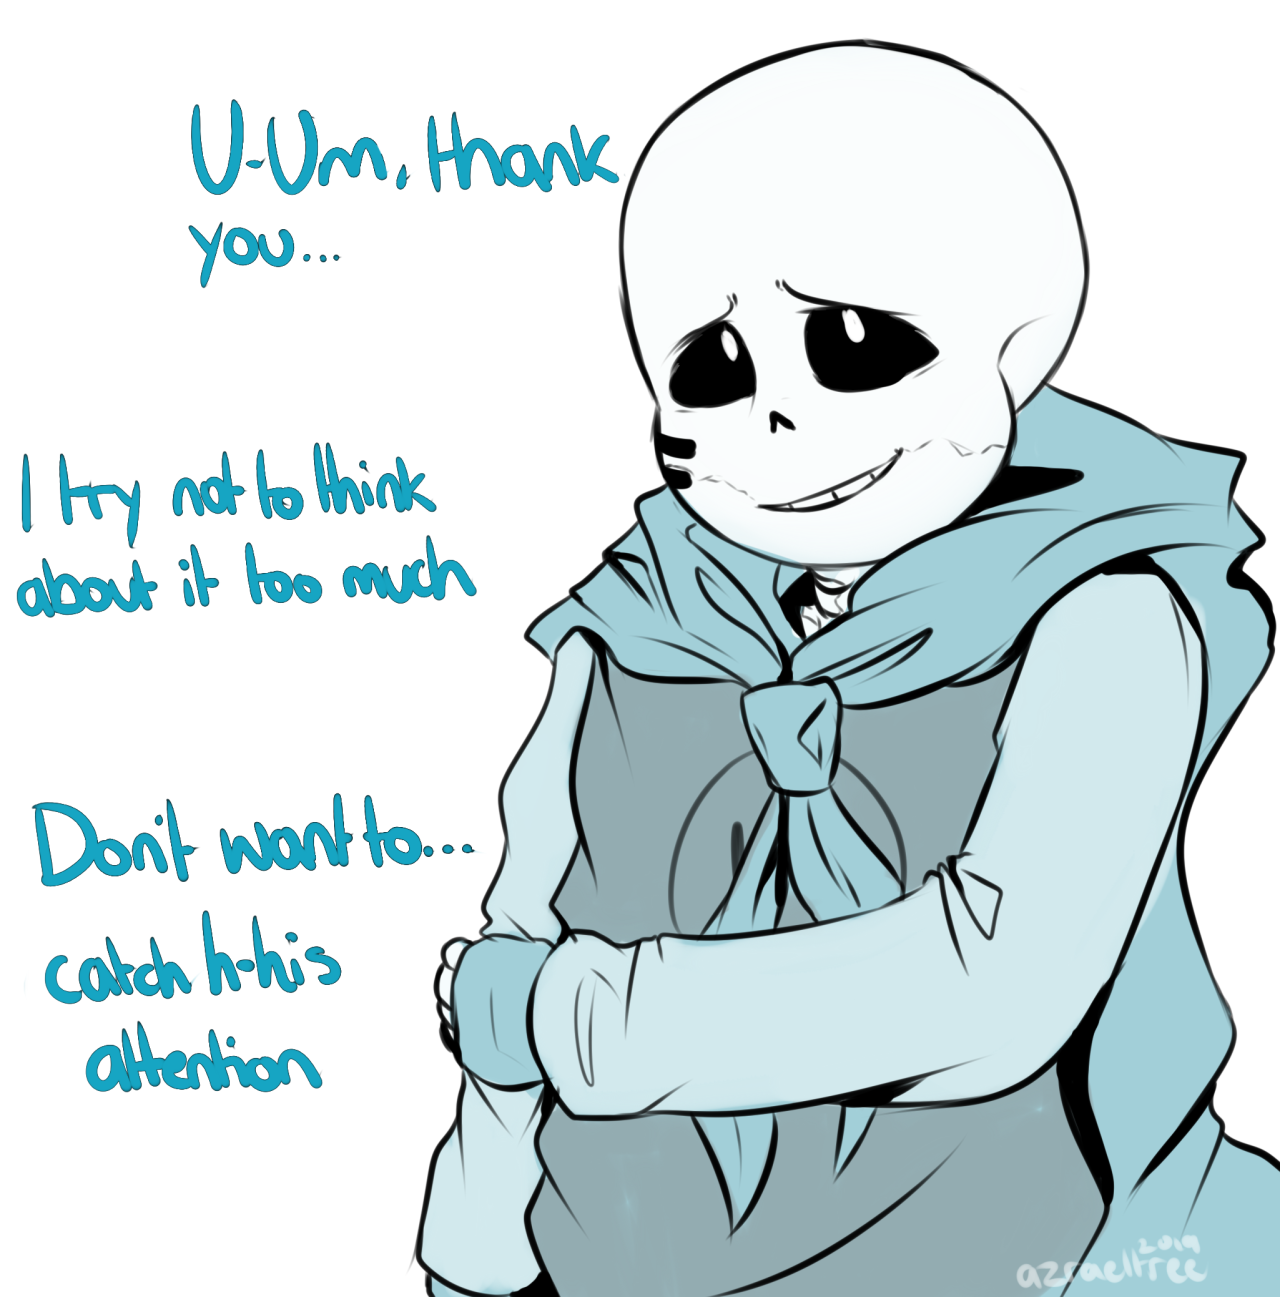 A SANS FIGHT SIMULATOR OF SANS FROM EVERY AU! - Imgflip